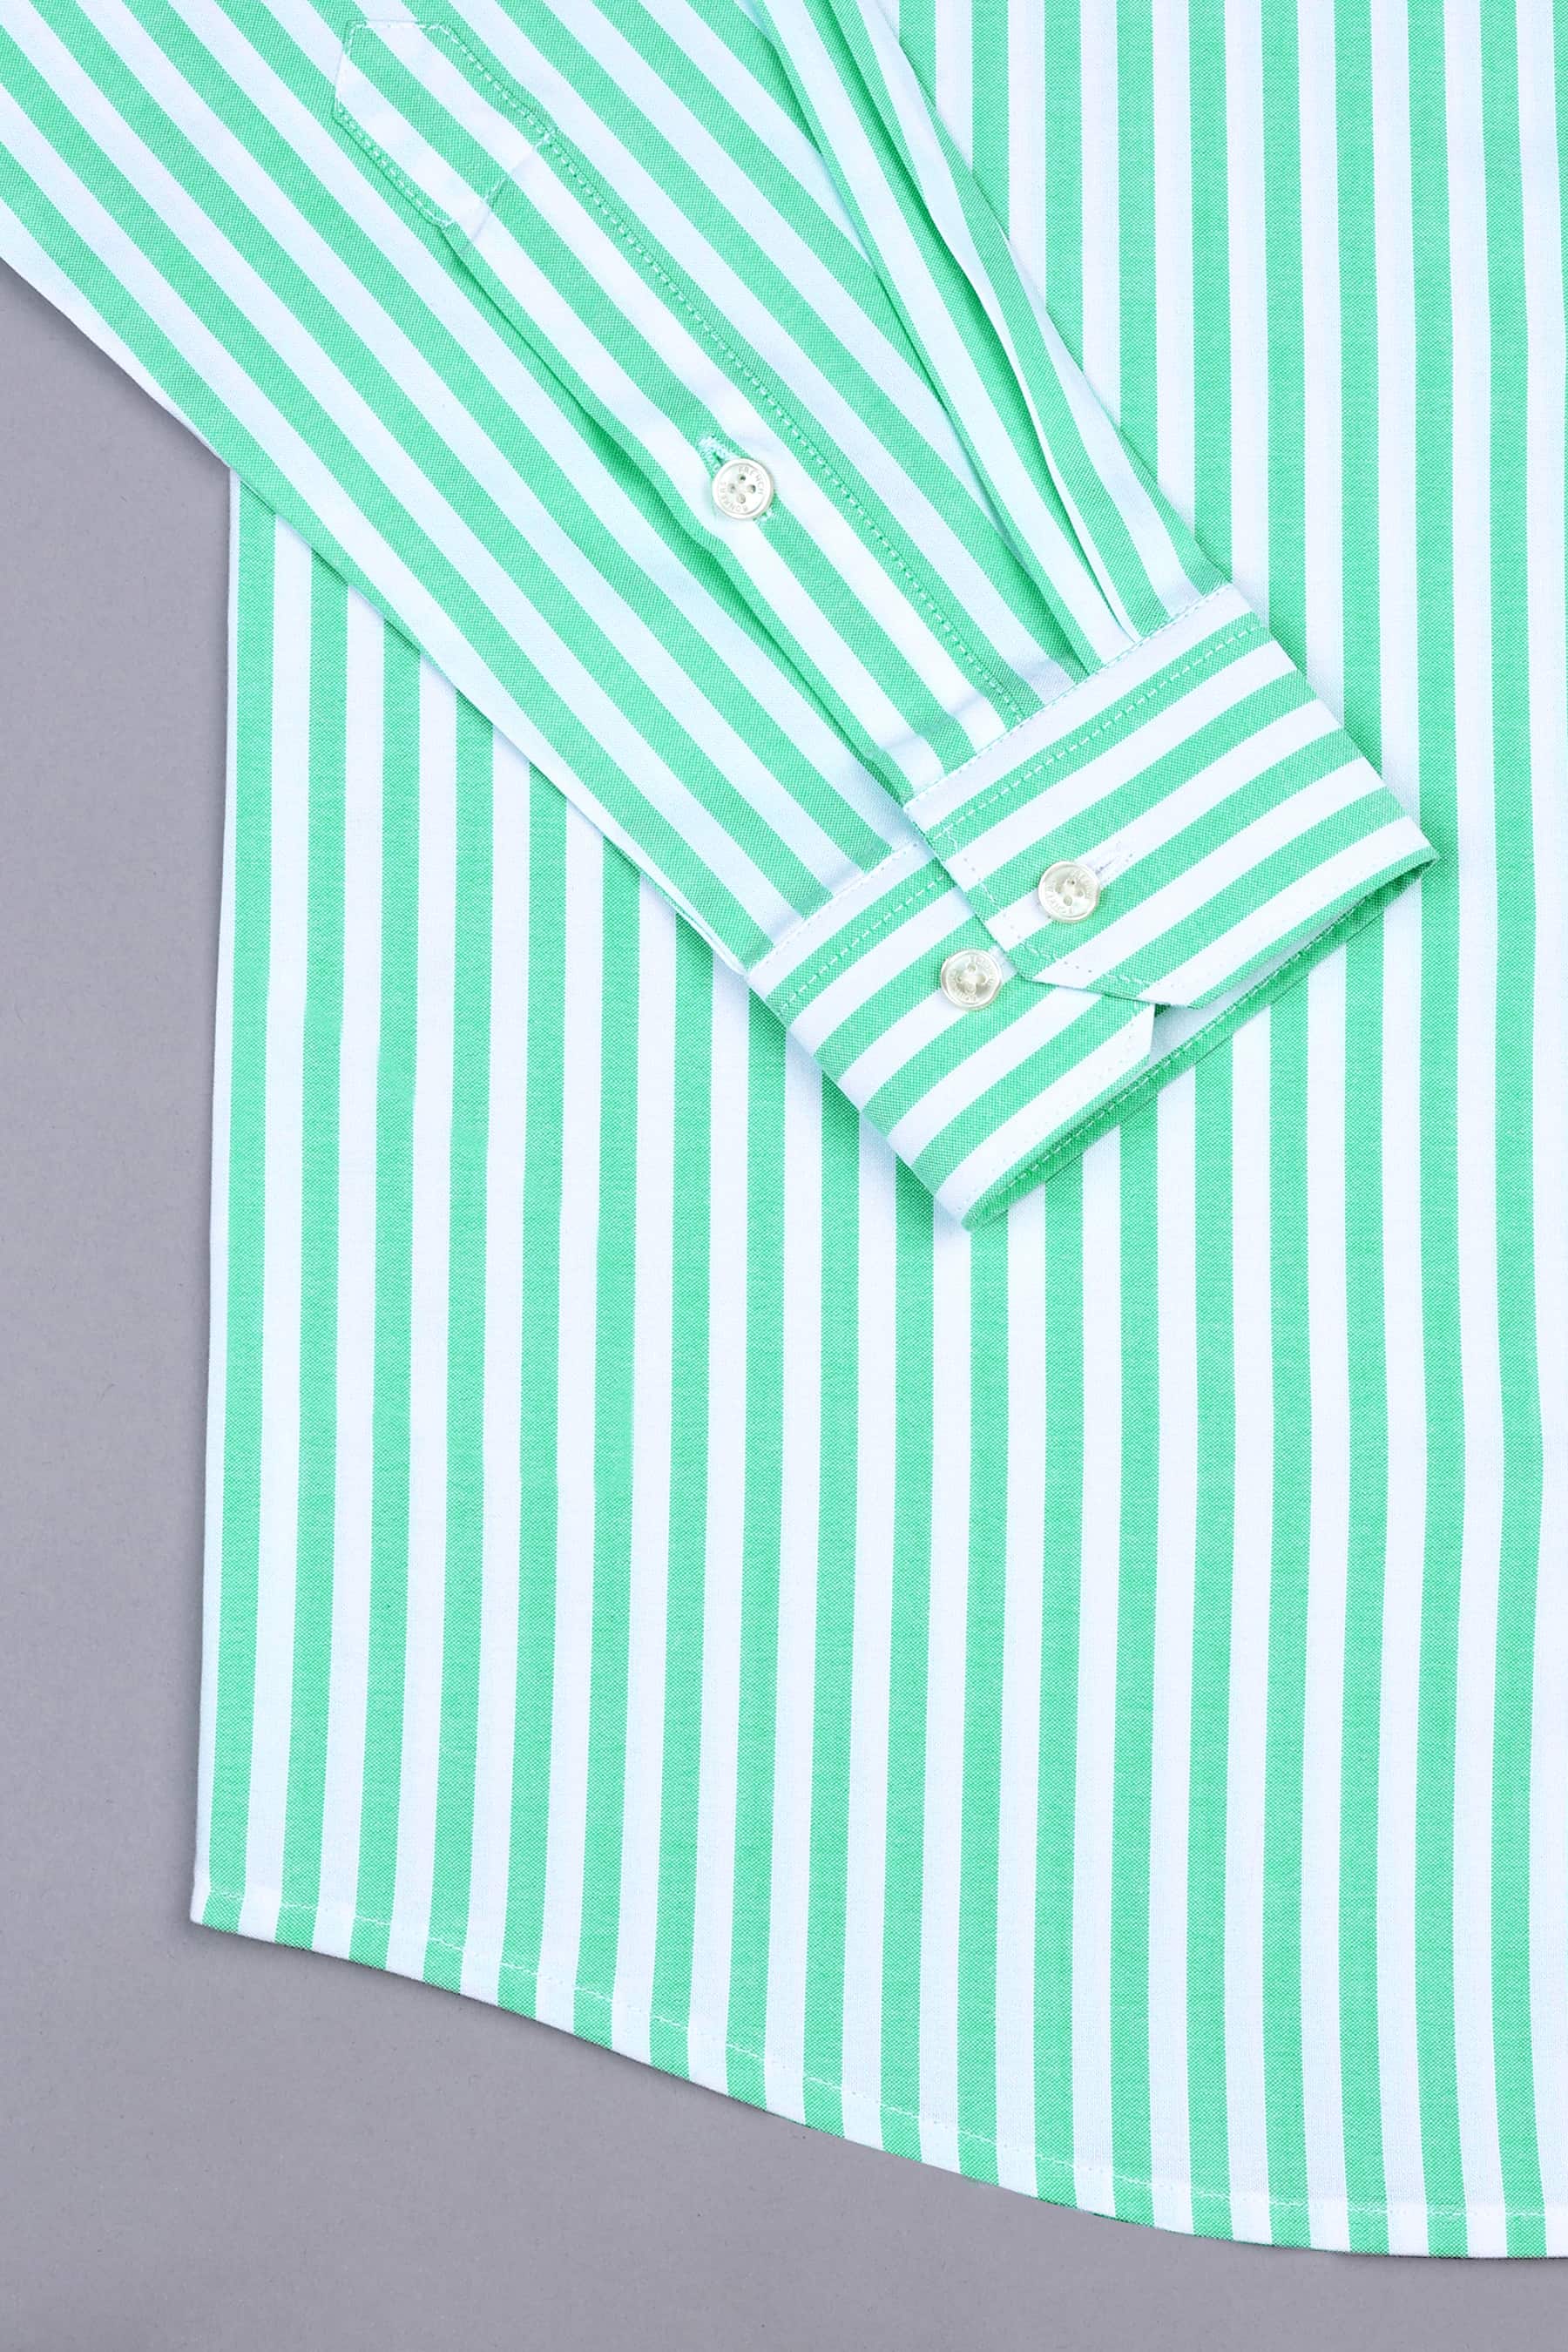 Mint green with white oxford bengal stripe shirt